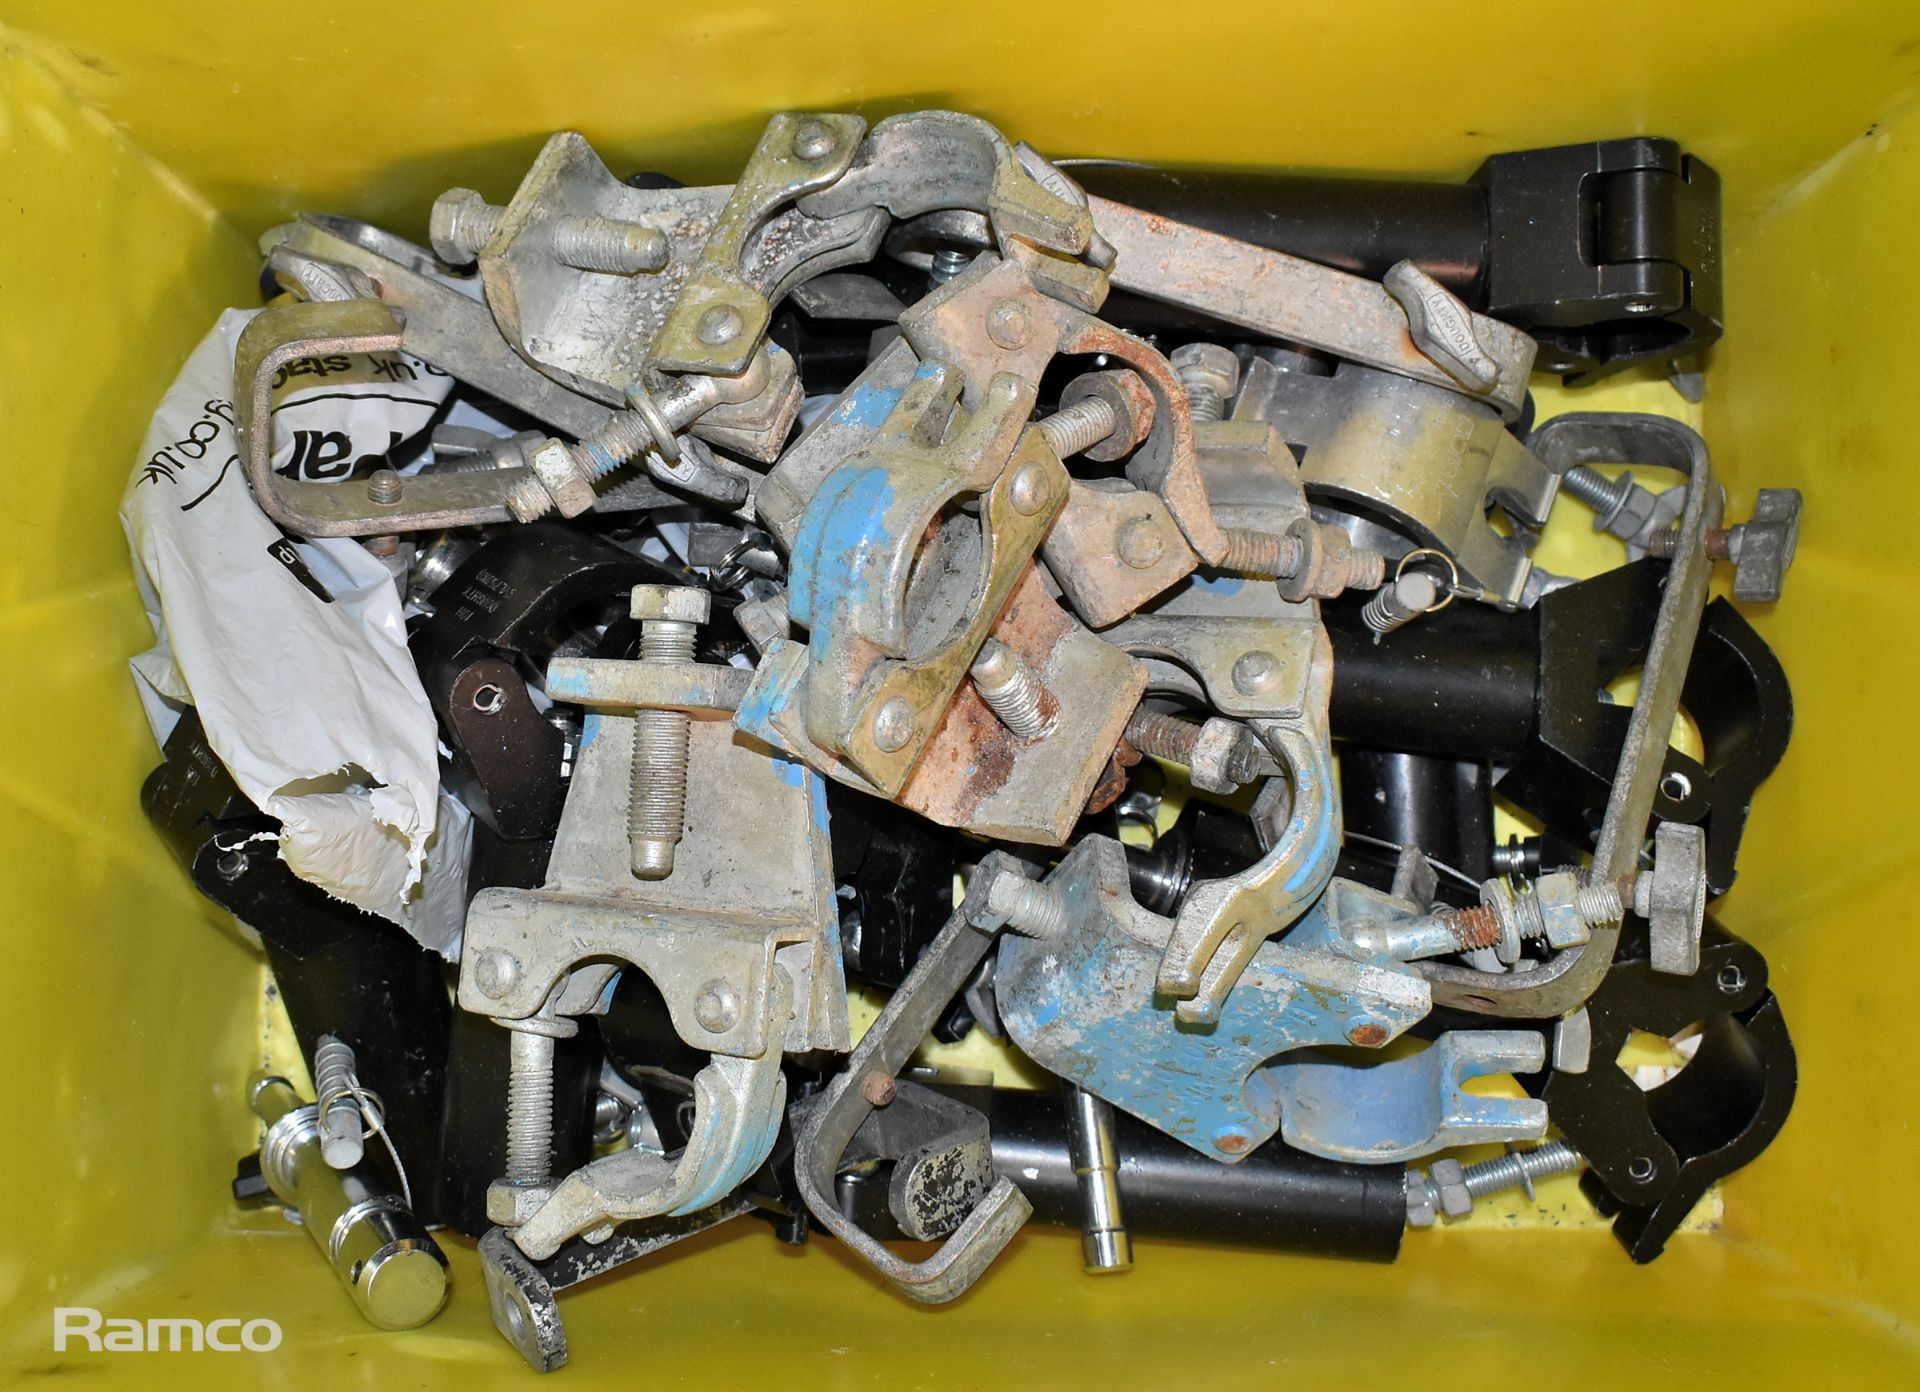 2x boxes of Doughty clamps and couplings & Box of clamps, couplings and other assorted fastenings - Image 4 of 6